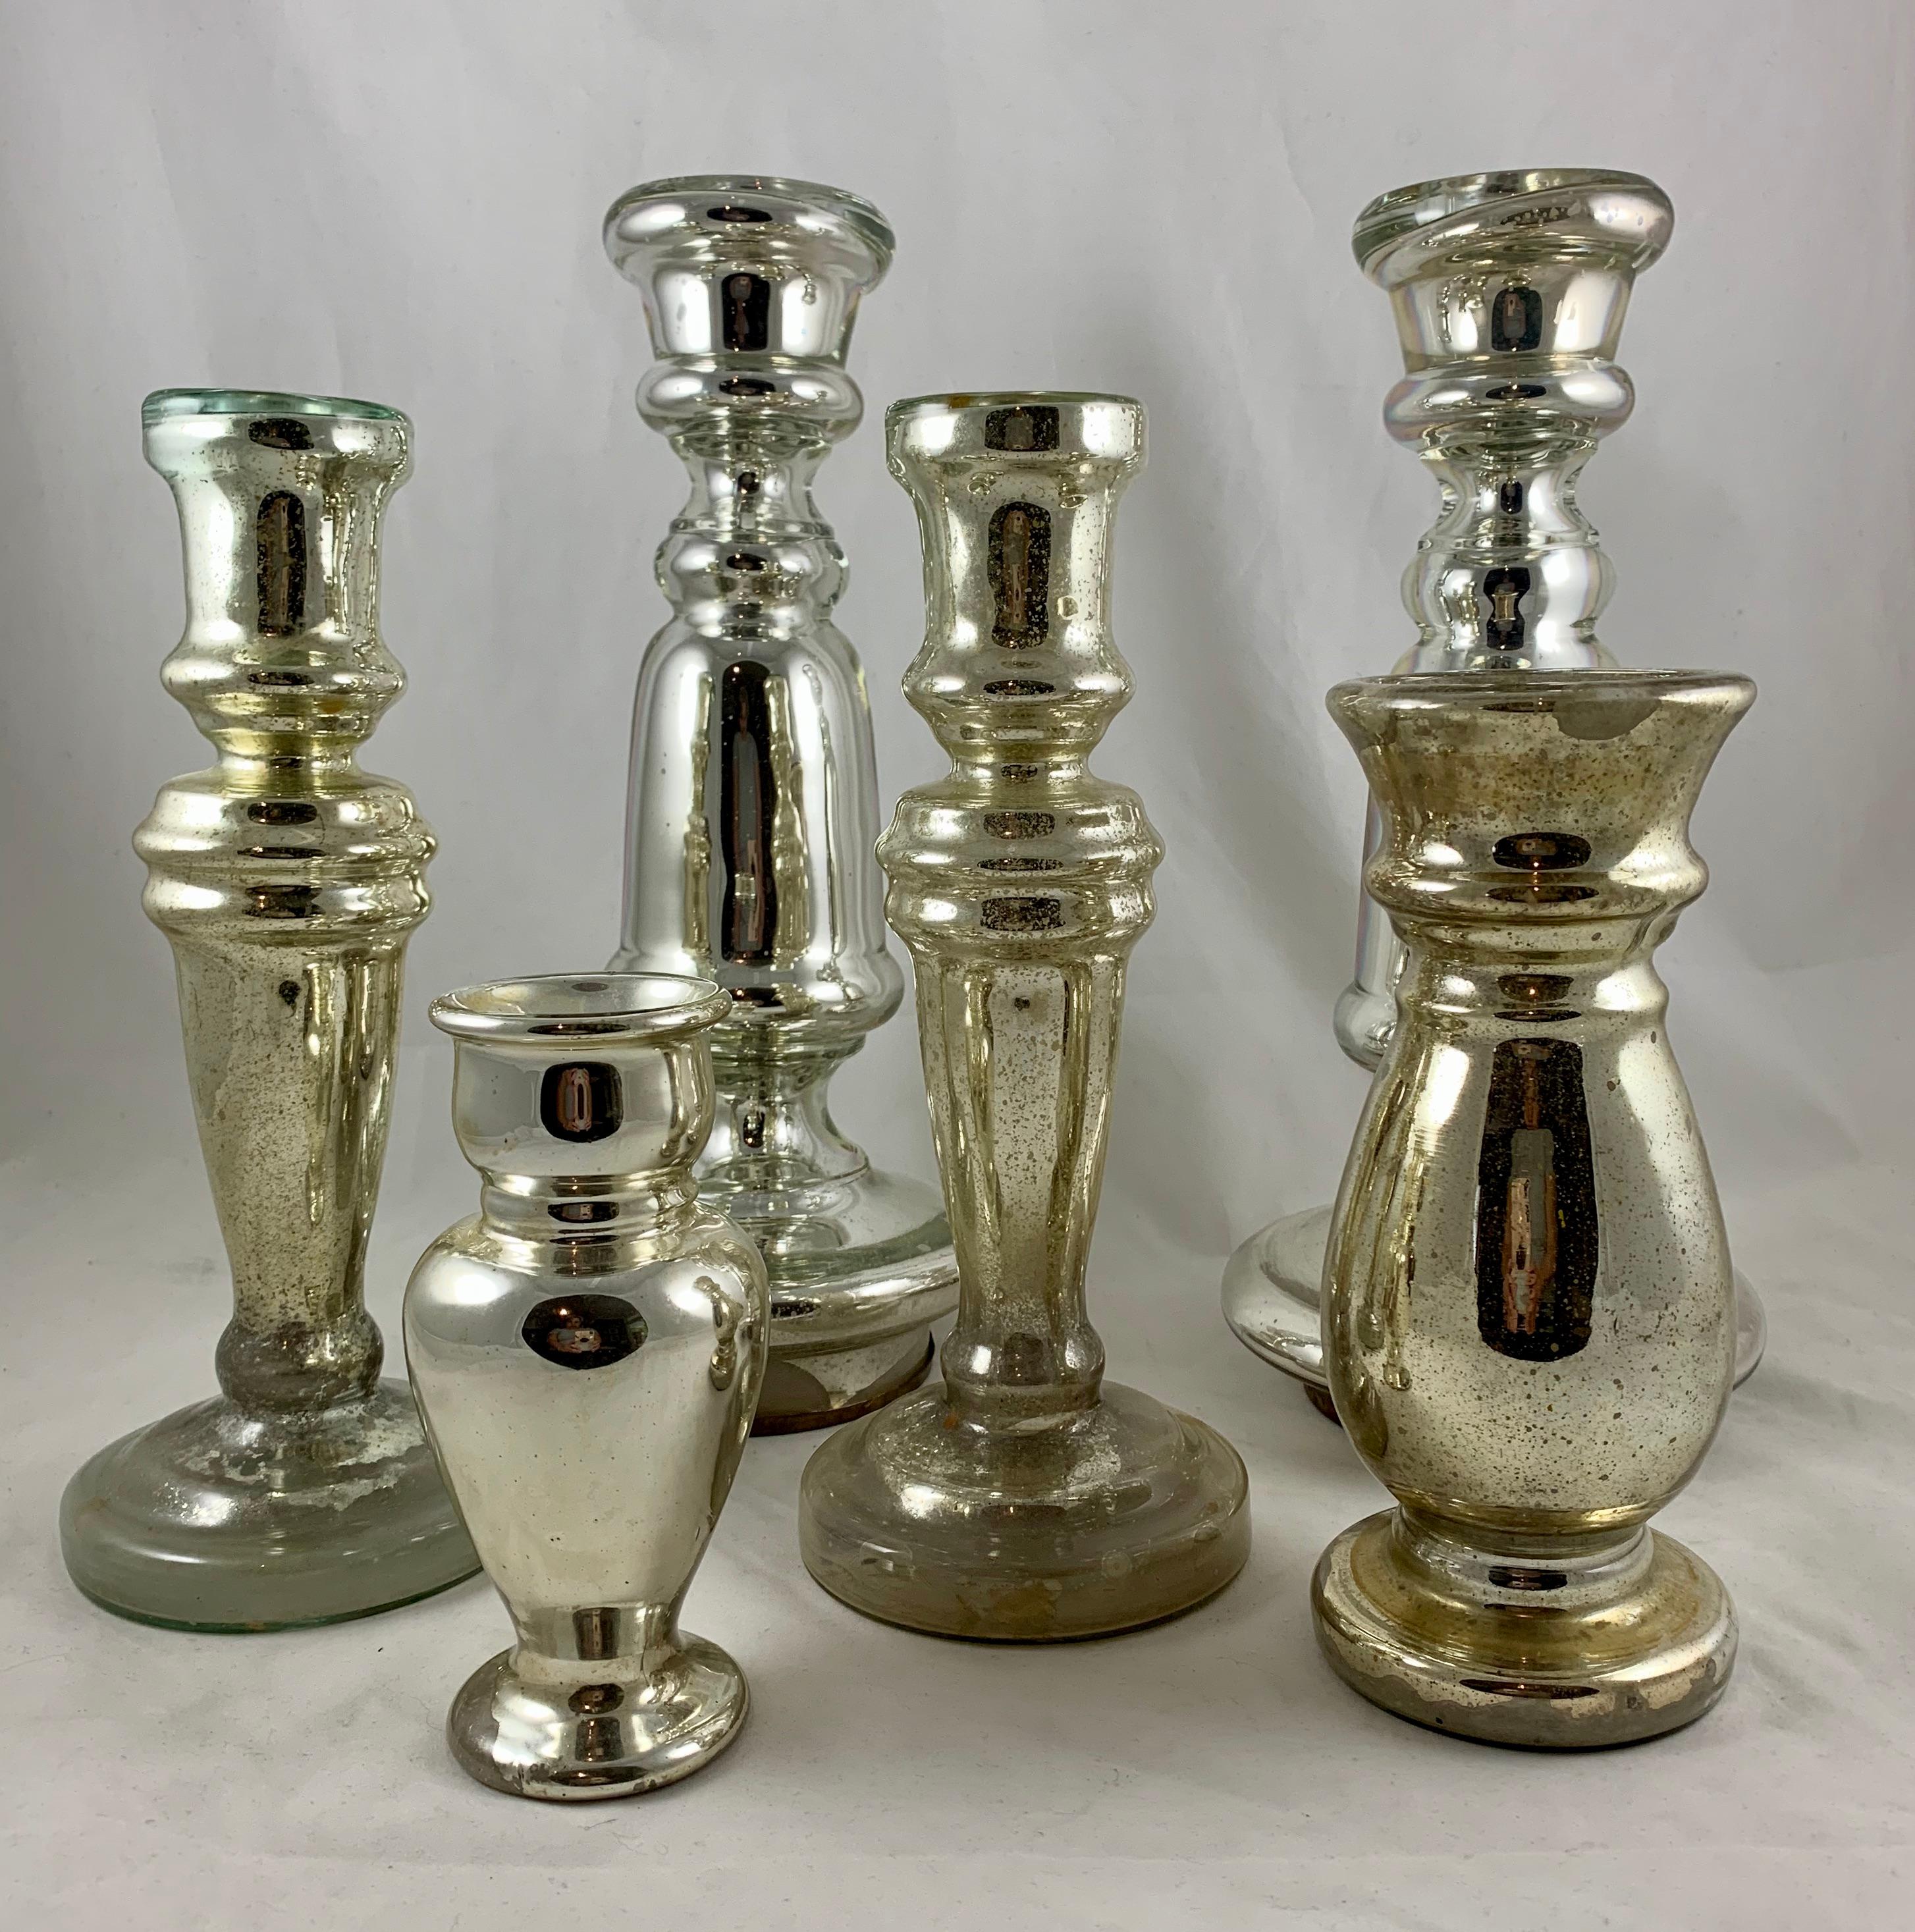 A beautiful collection of six Mercury glass candlesticks, England, circa 1840-1855.

Silvered Mercury glass is mouth-blown double walled, then silvered between the layers with a liquid silvering solution. The silvering is a heated solution of